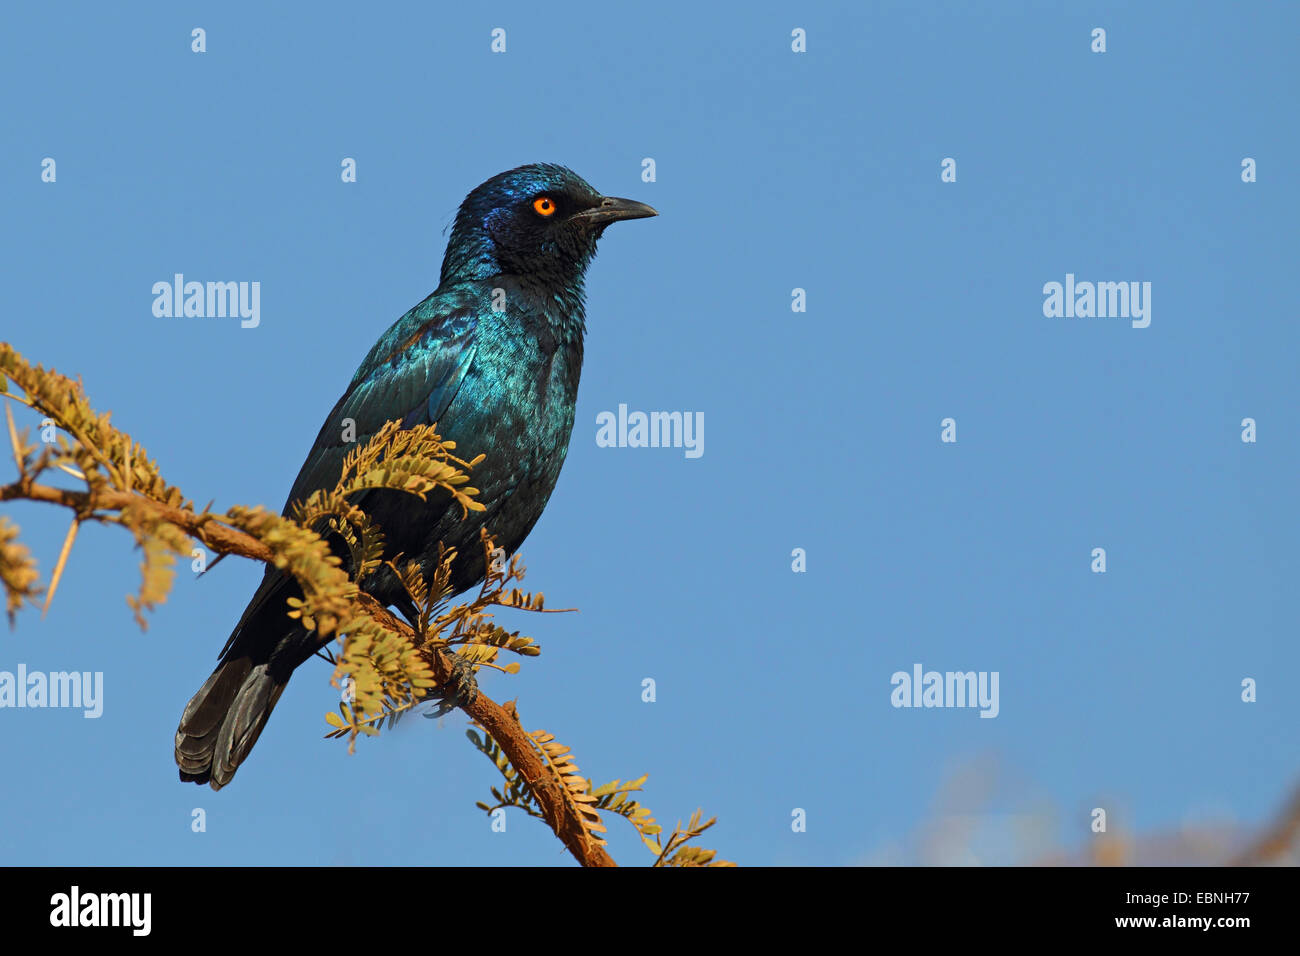 red-shouldered glossy starling (Lamprotornis nitens), sitting on a branch, South Africa, Pilanesberg National Park Stock Photo